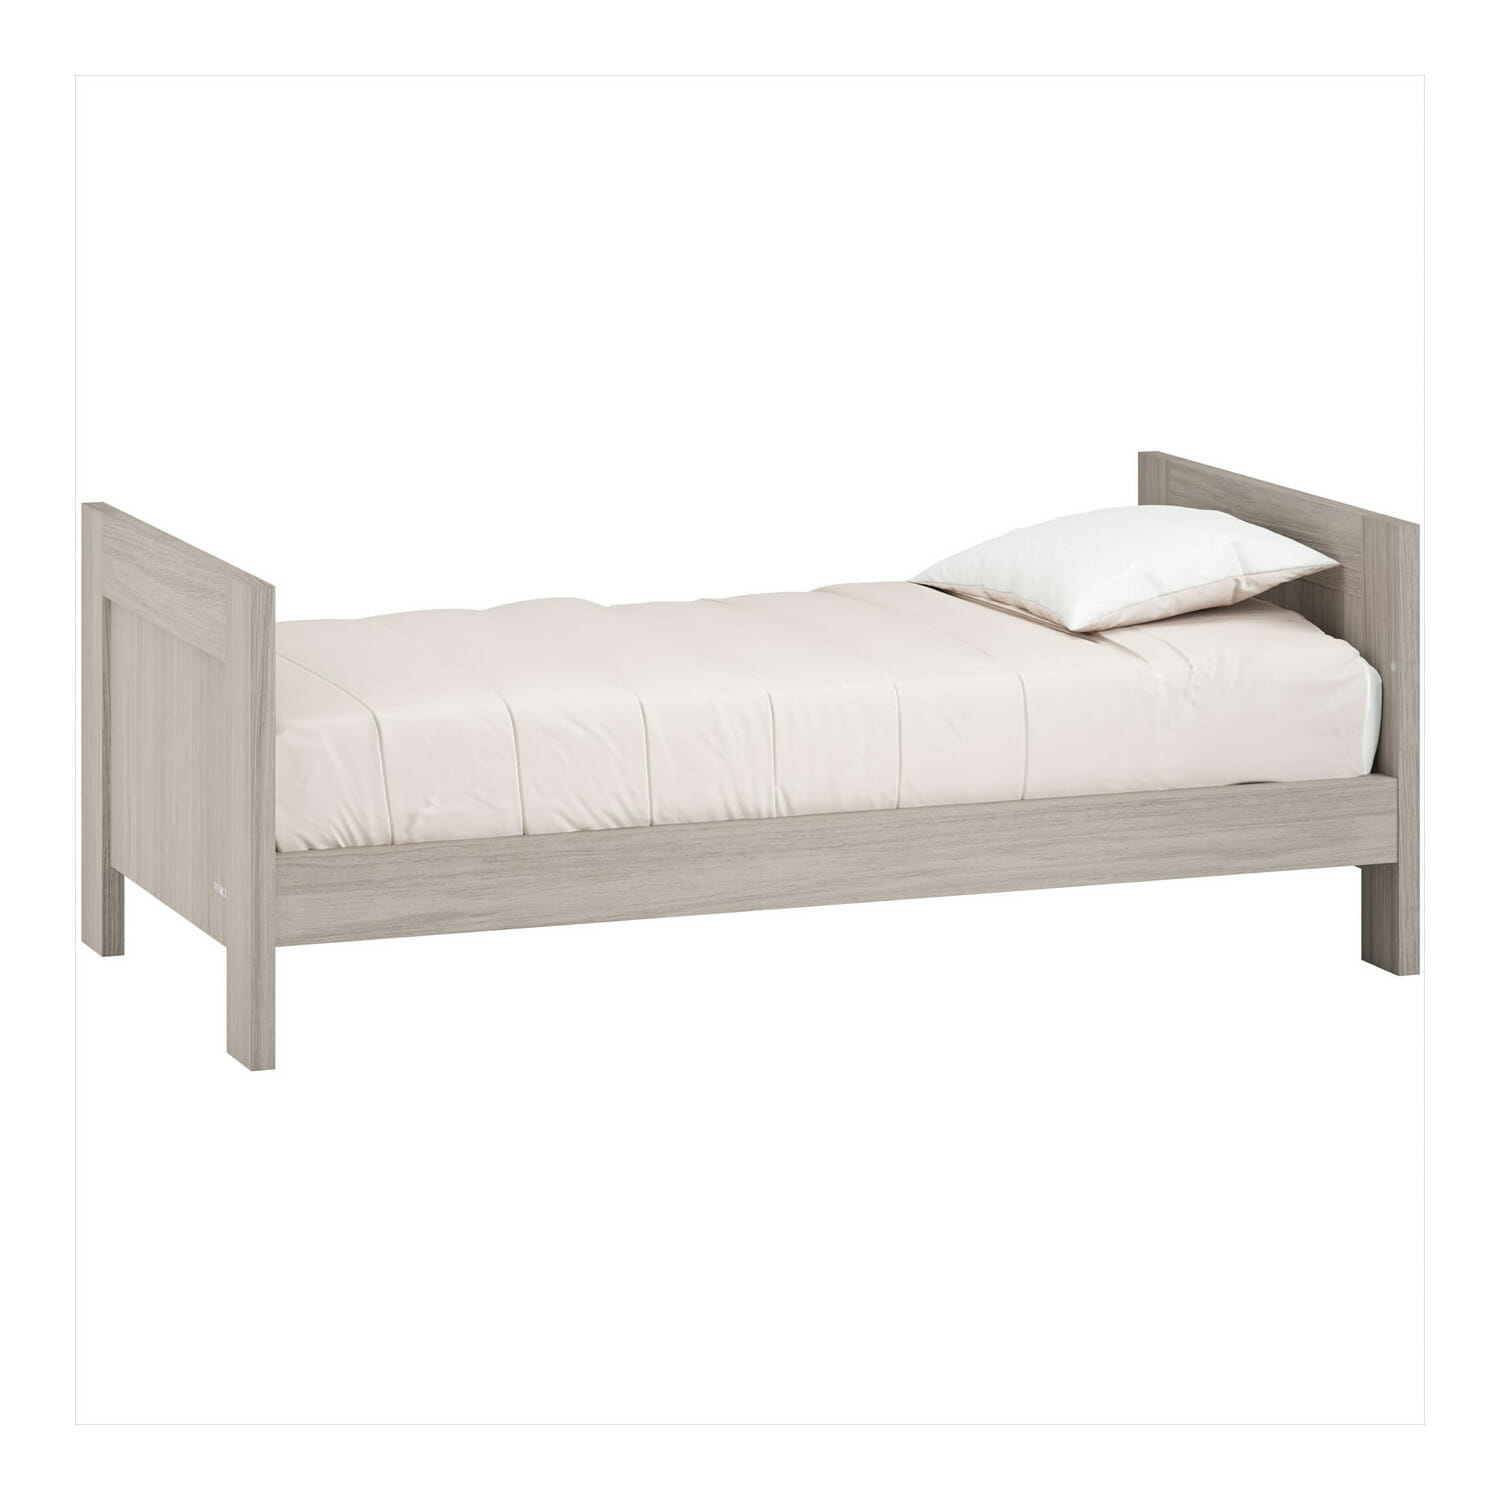 Venicci Forenzo Cot Bed with Underdrawer - Nordik White